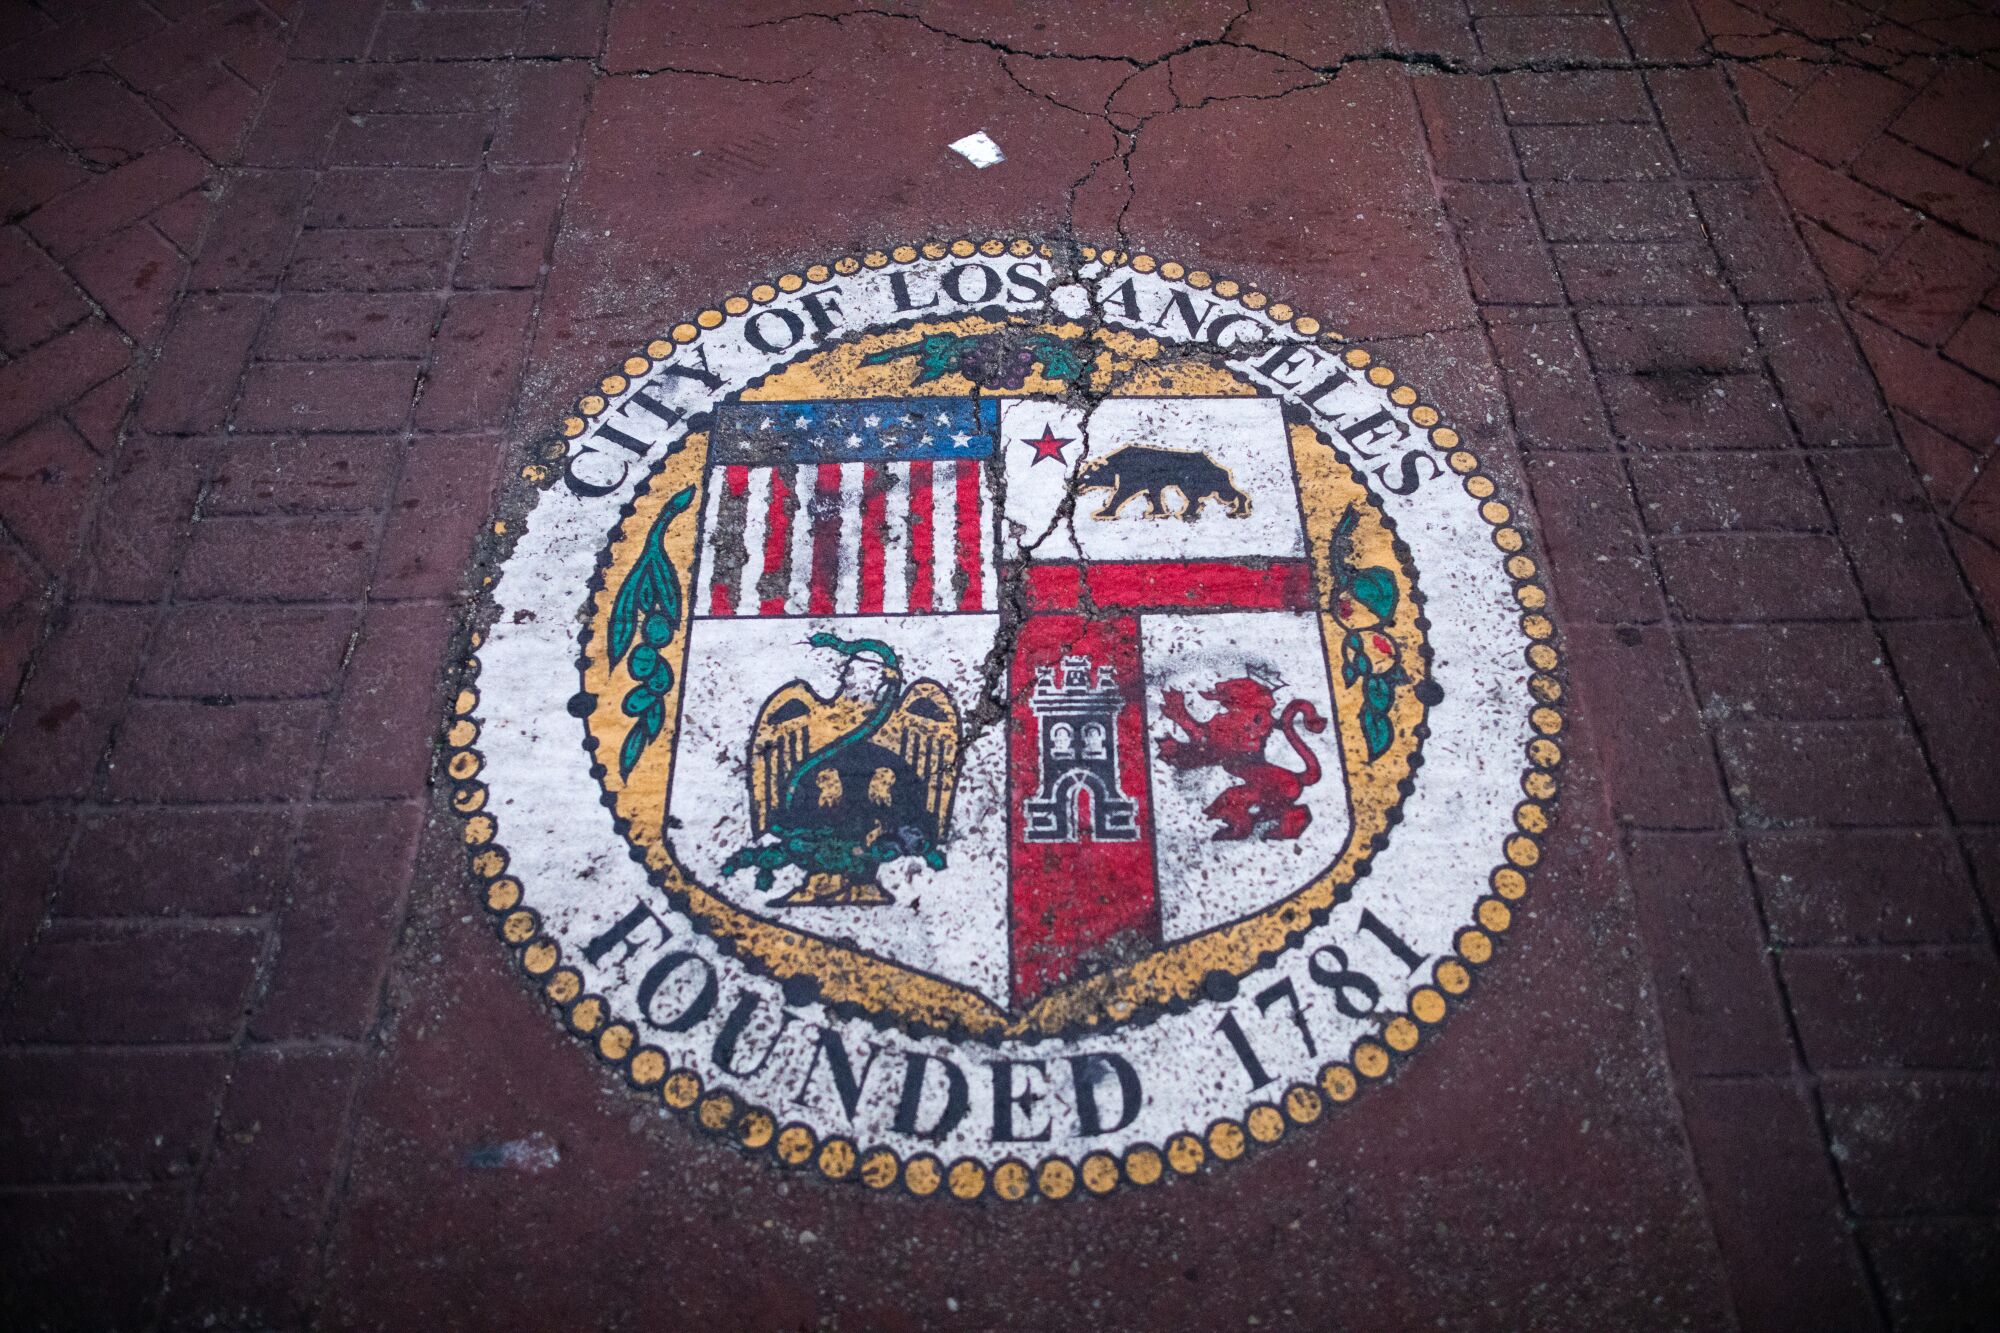 A weathered city seal on a pedestrian crosswalk in front of City Hall in downtown Los Angeles.